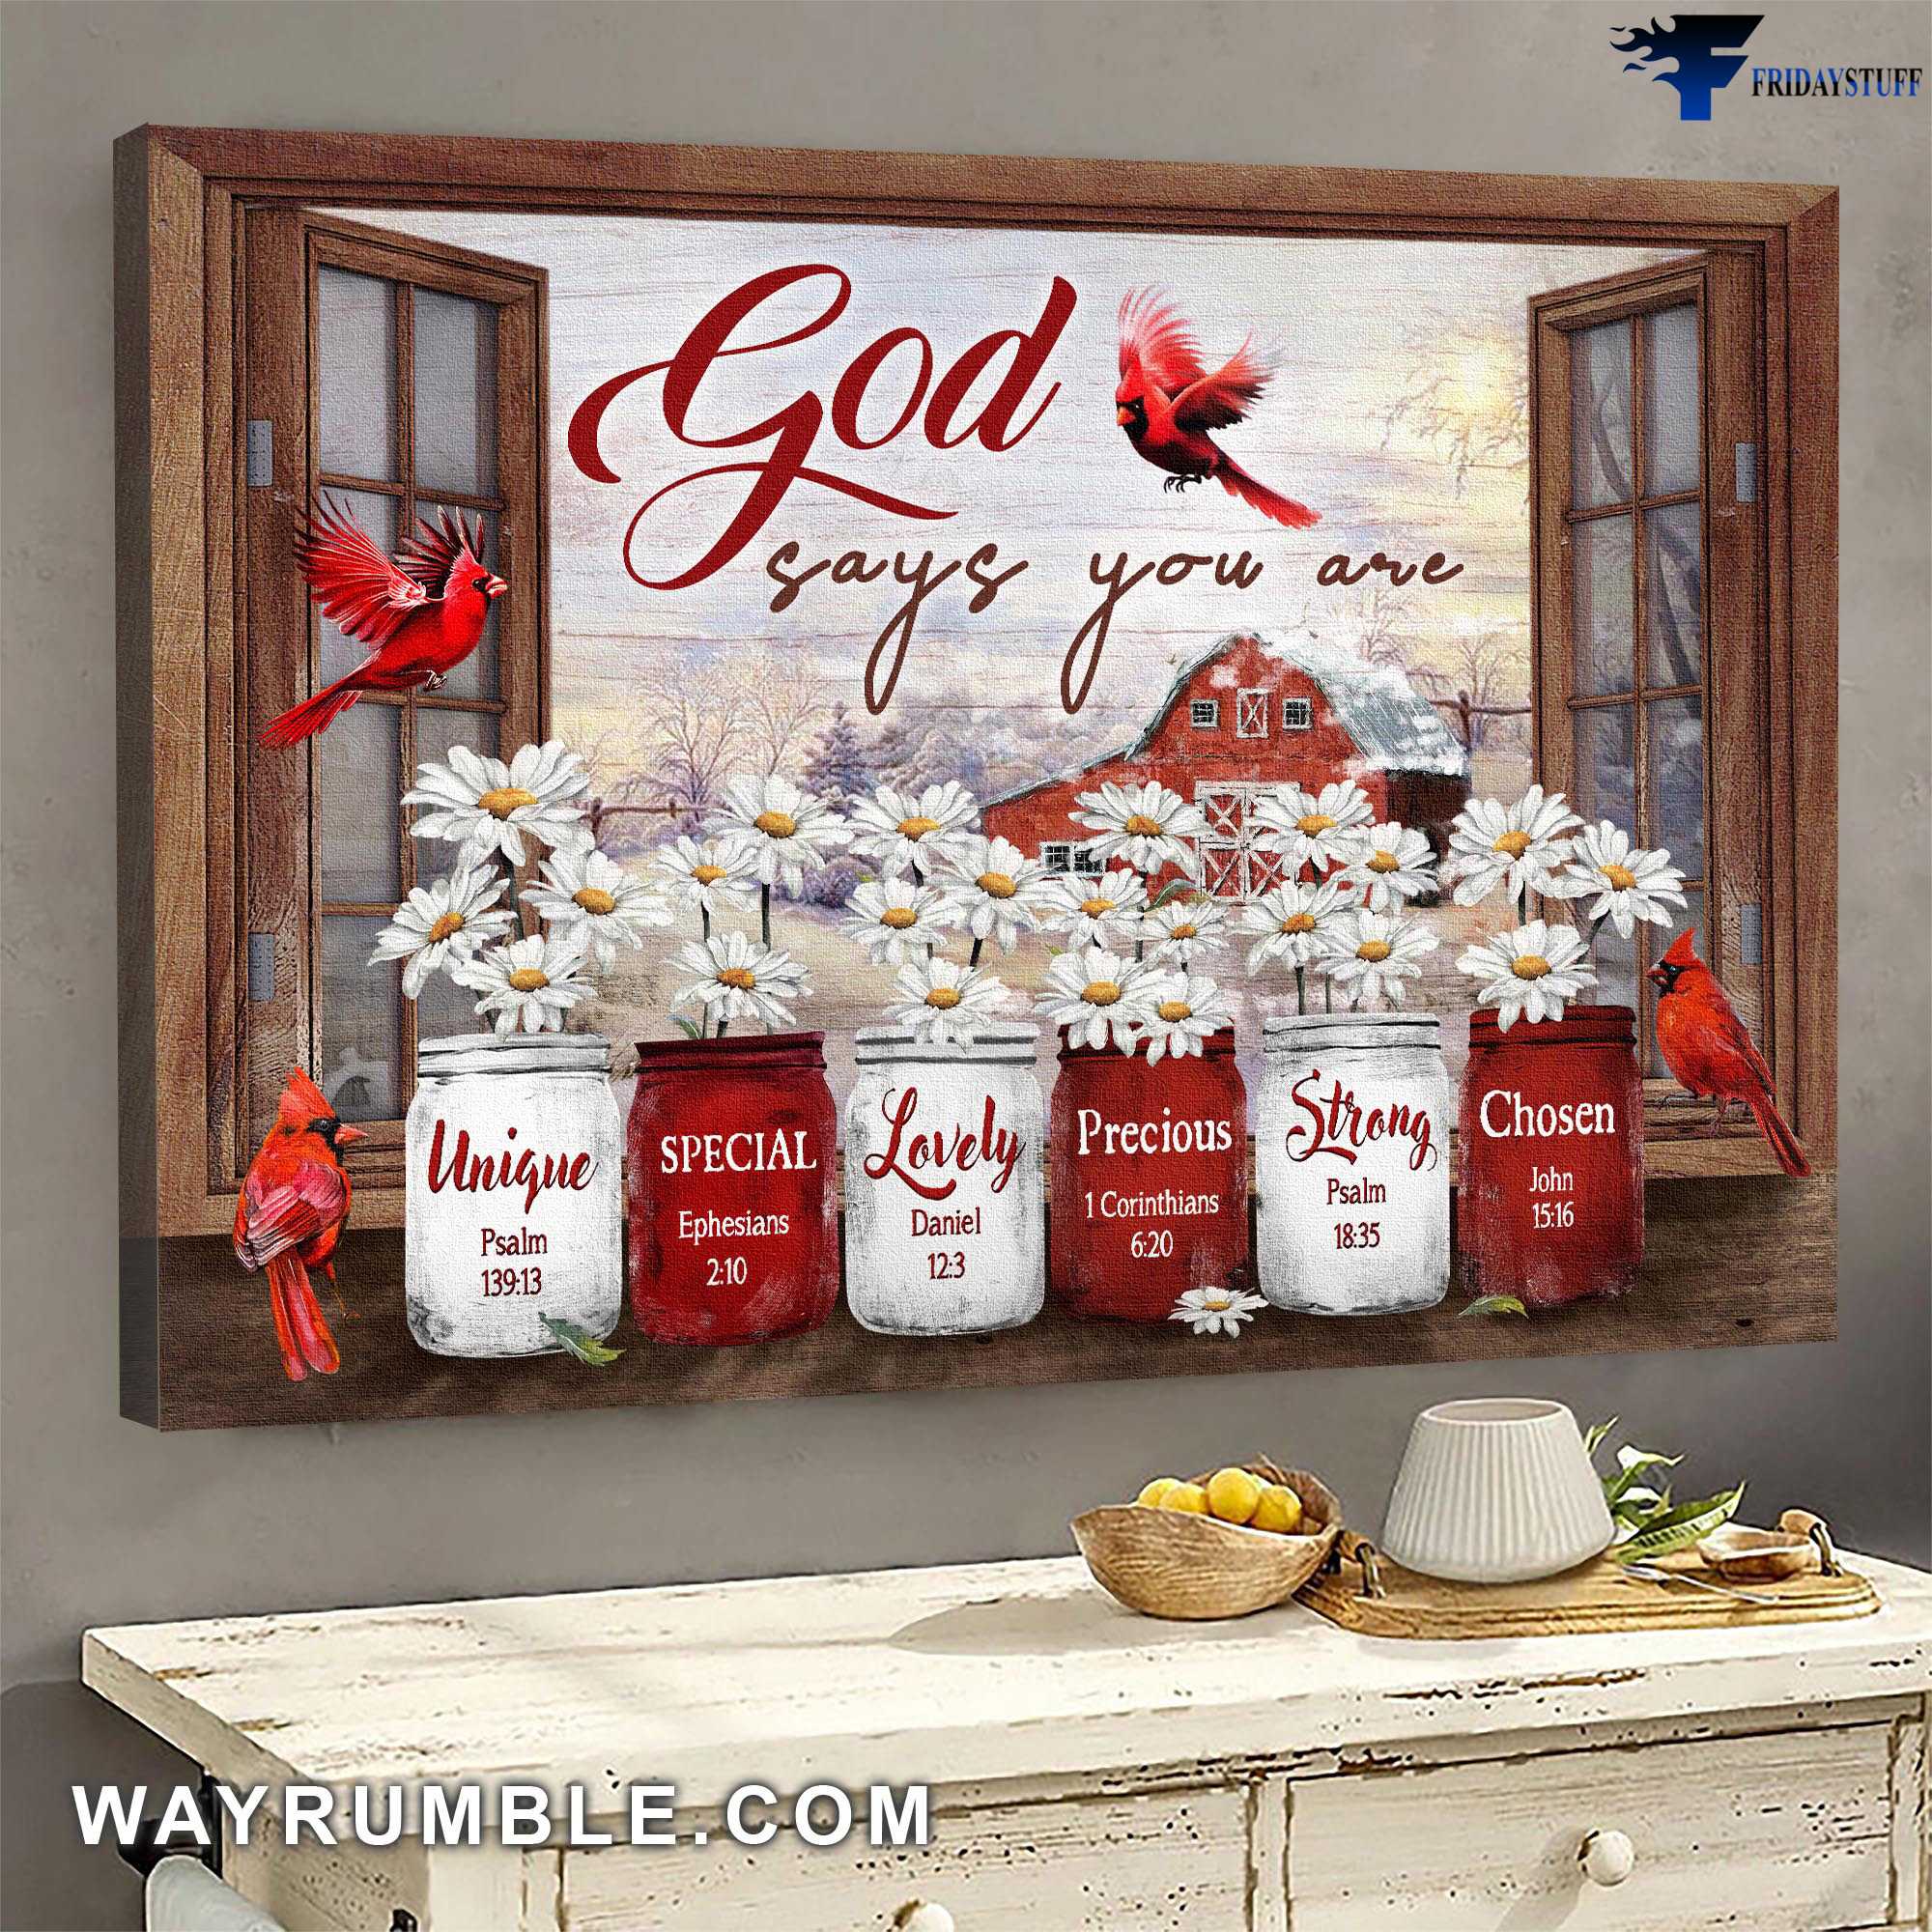 Cardinal Bird, Flower Poster - God Says You Are Unique, Special, Lovely, Precious, Strong, Chosen, Window Poster